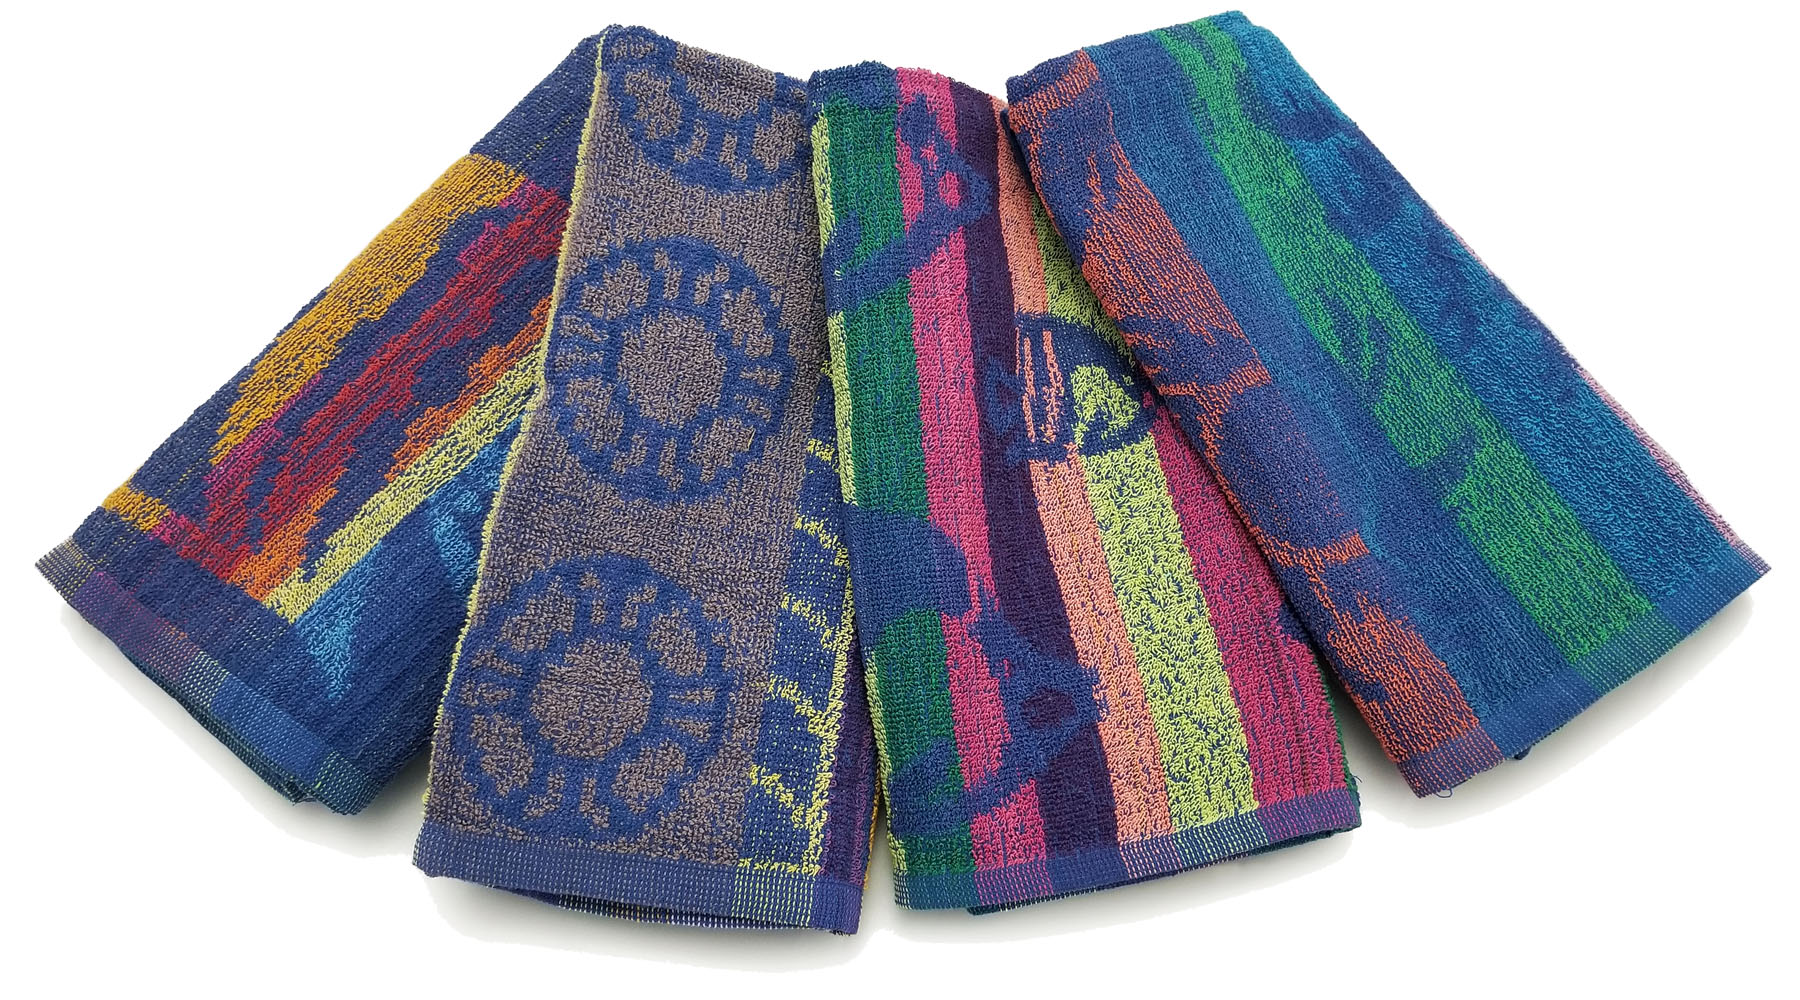 29x59 Lightweight Economy Jacquard Assorted Design Towels. 100% Cotton. Low cost with colored varying colored designs